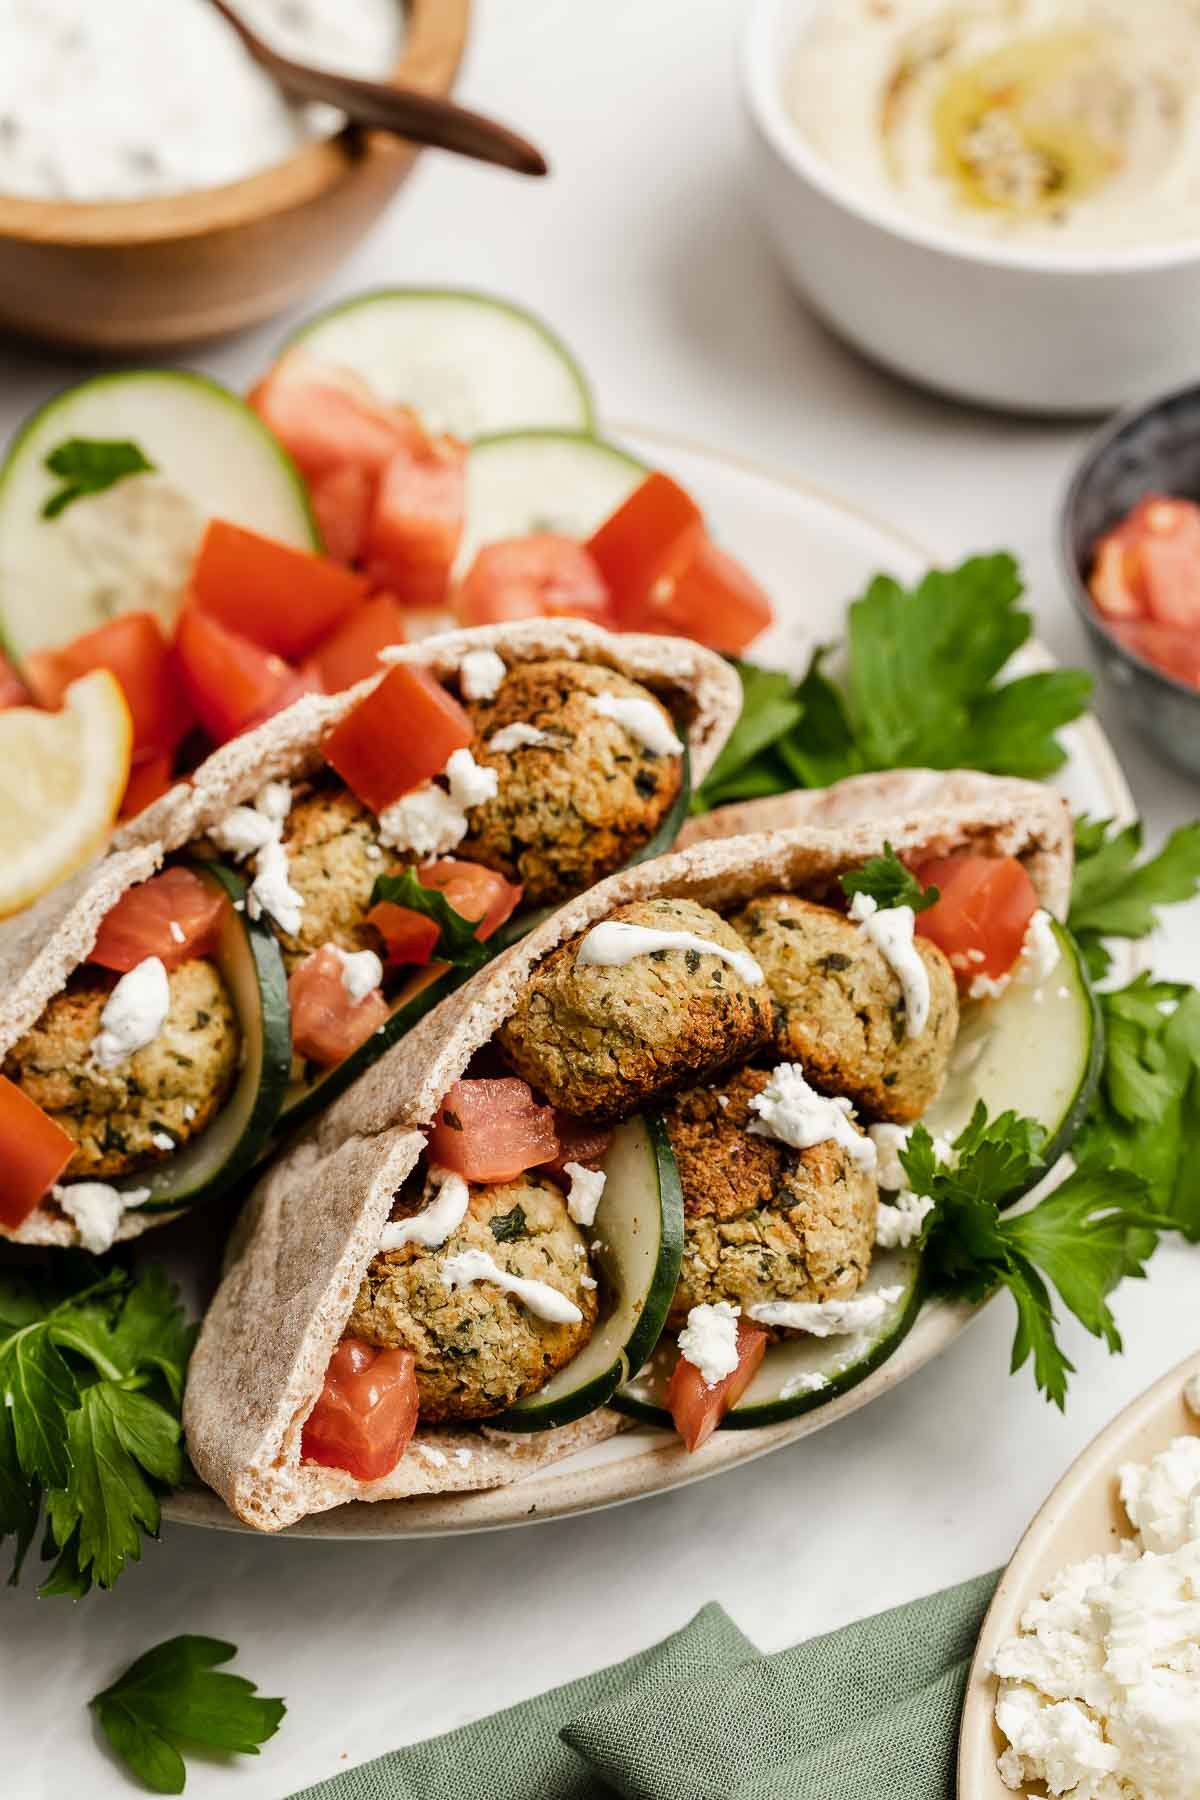 Pitas, split open and stuffed with baked falafel, cucumbers, tomatoes and drizzled with white sauce.